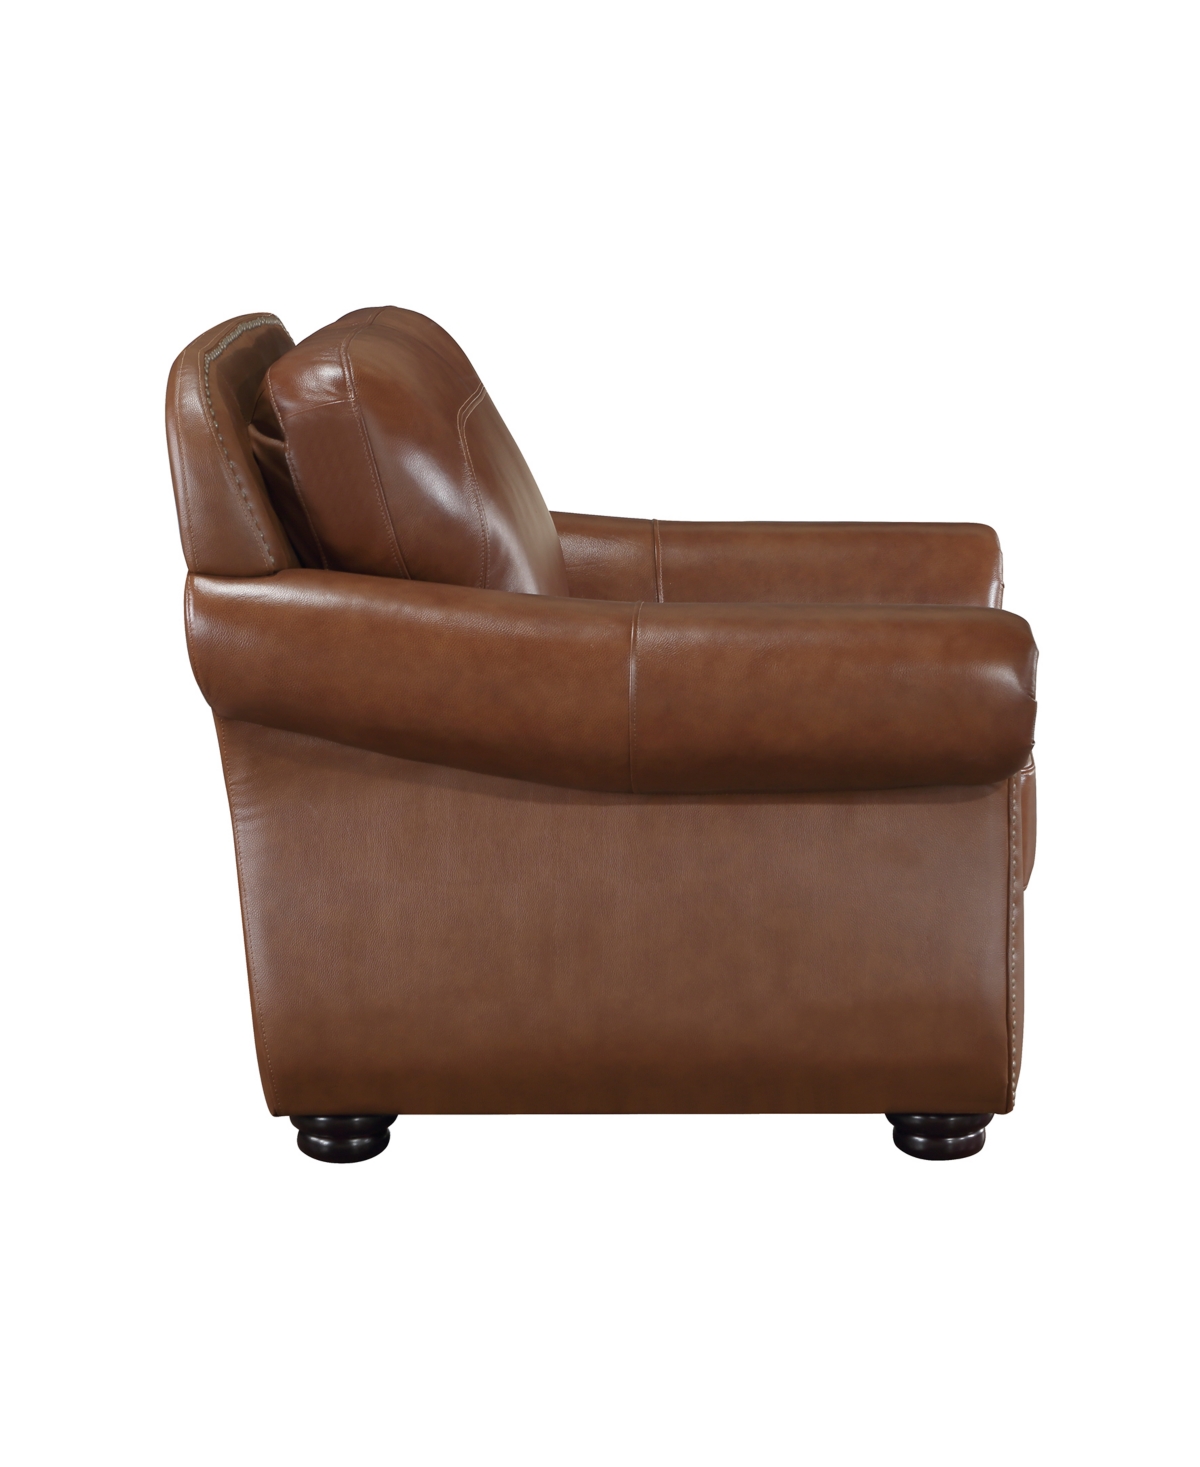 Shop Homelegance White Label Dadeville 42" Leather Match Chair In Camel Brown